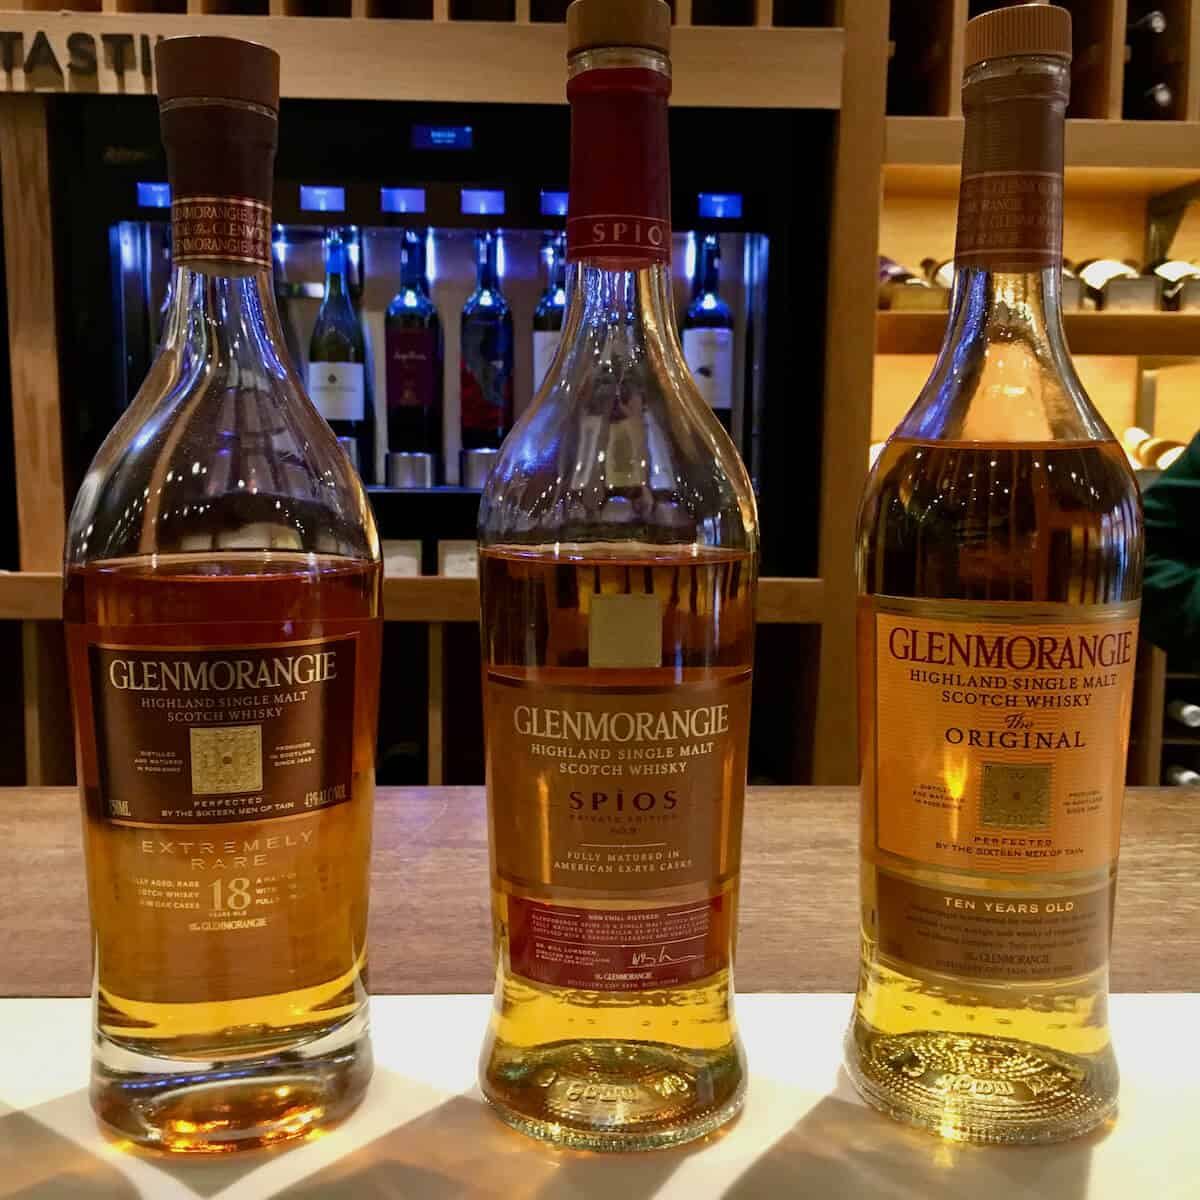 Glenmorangie Original, Spios, and Extremely Rare in bottles on a counter.